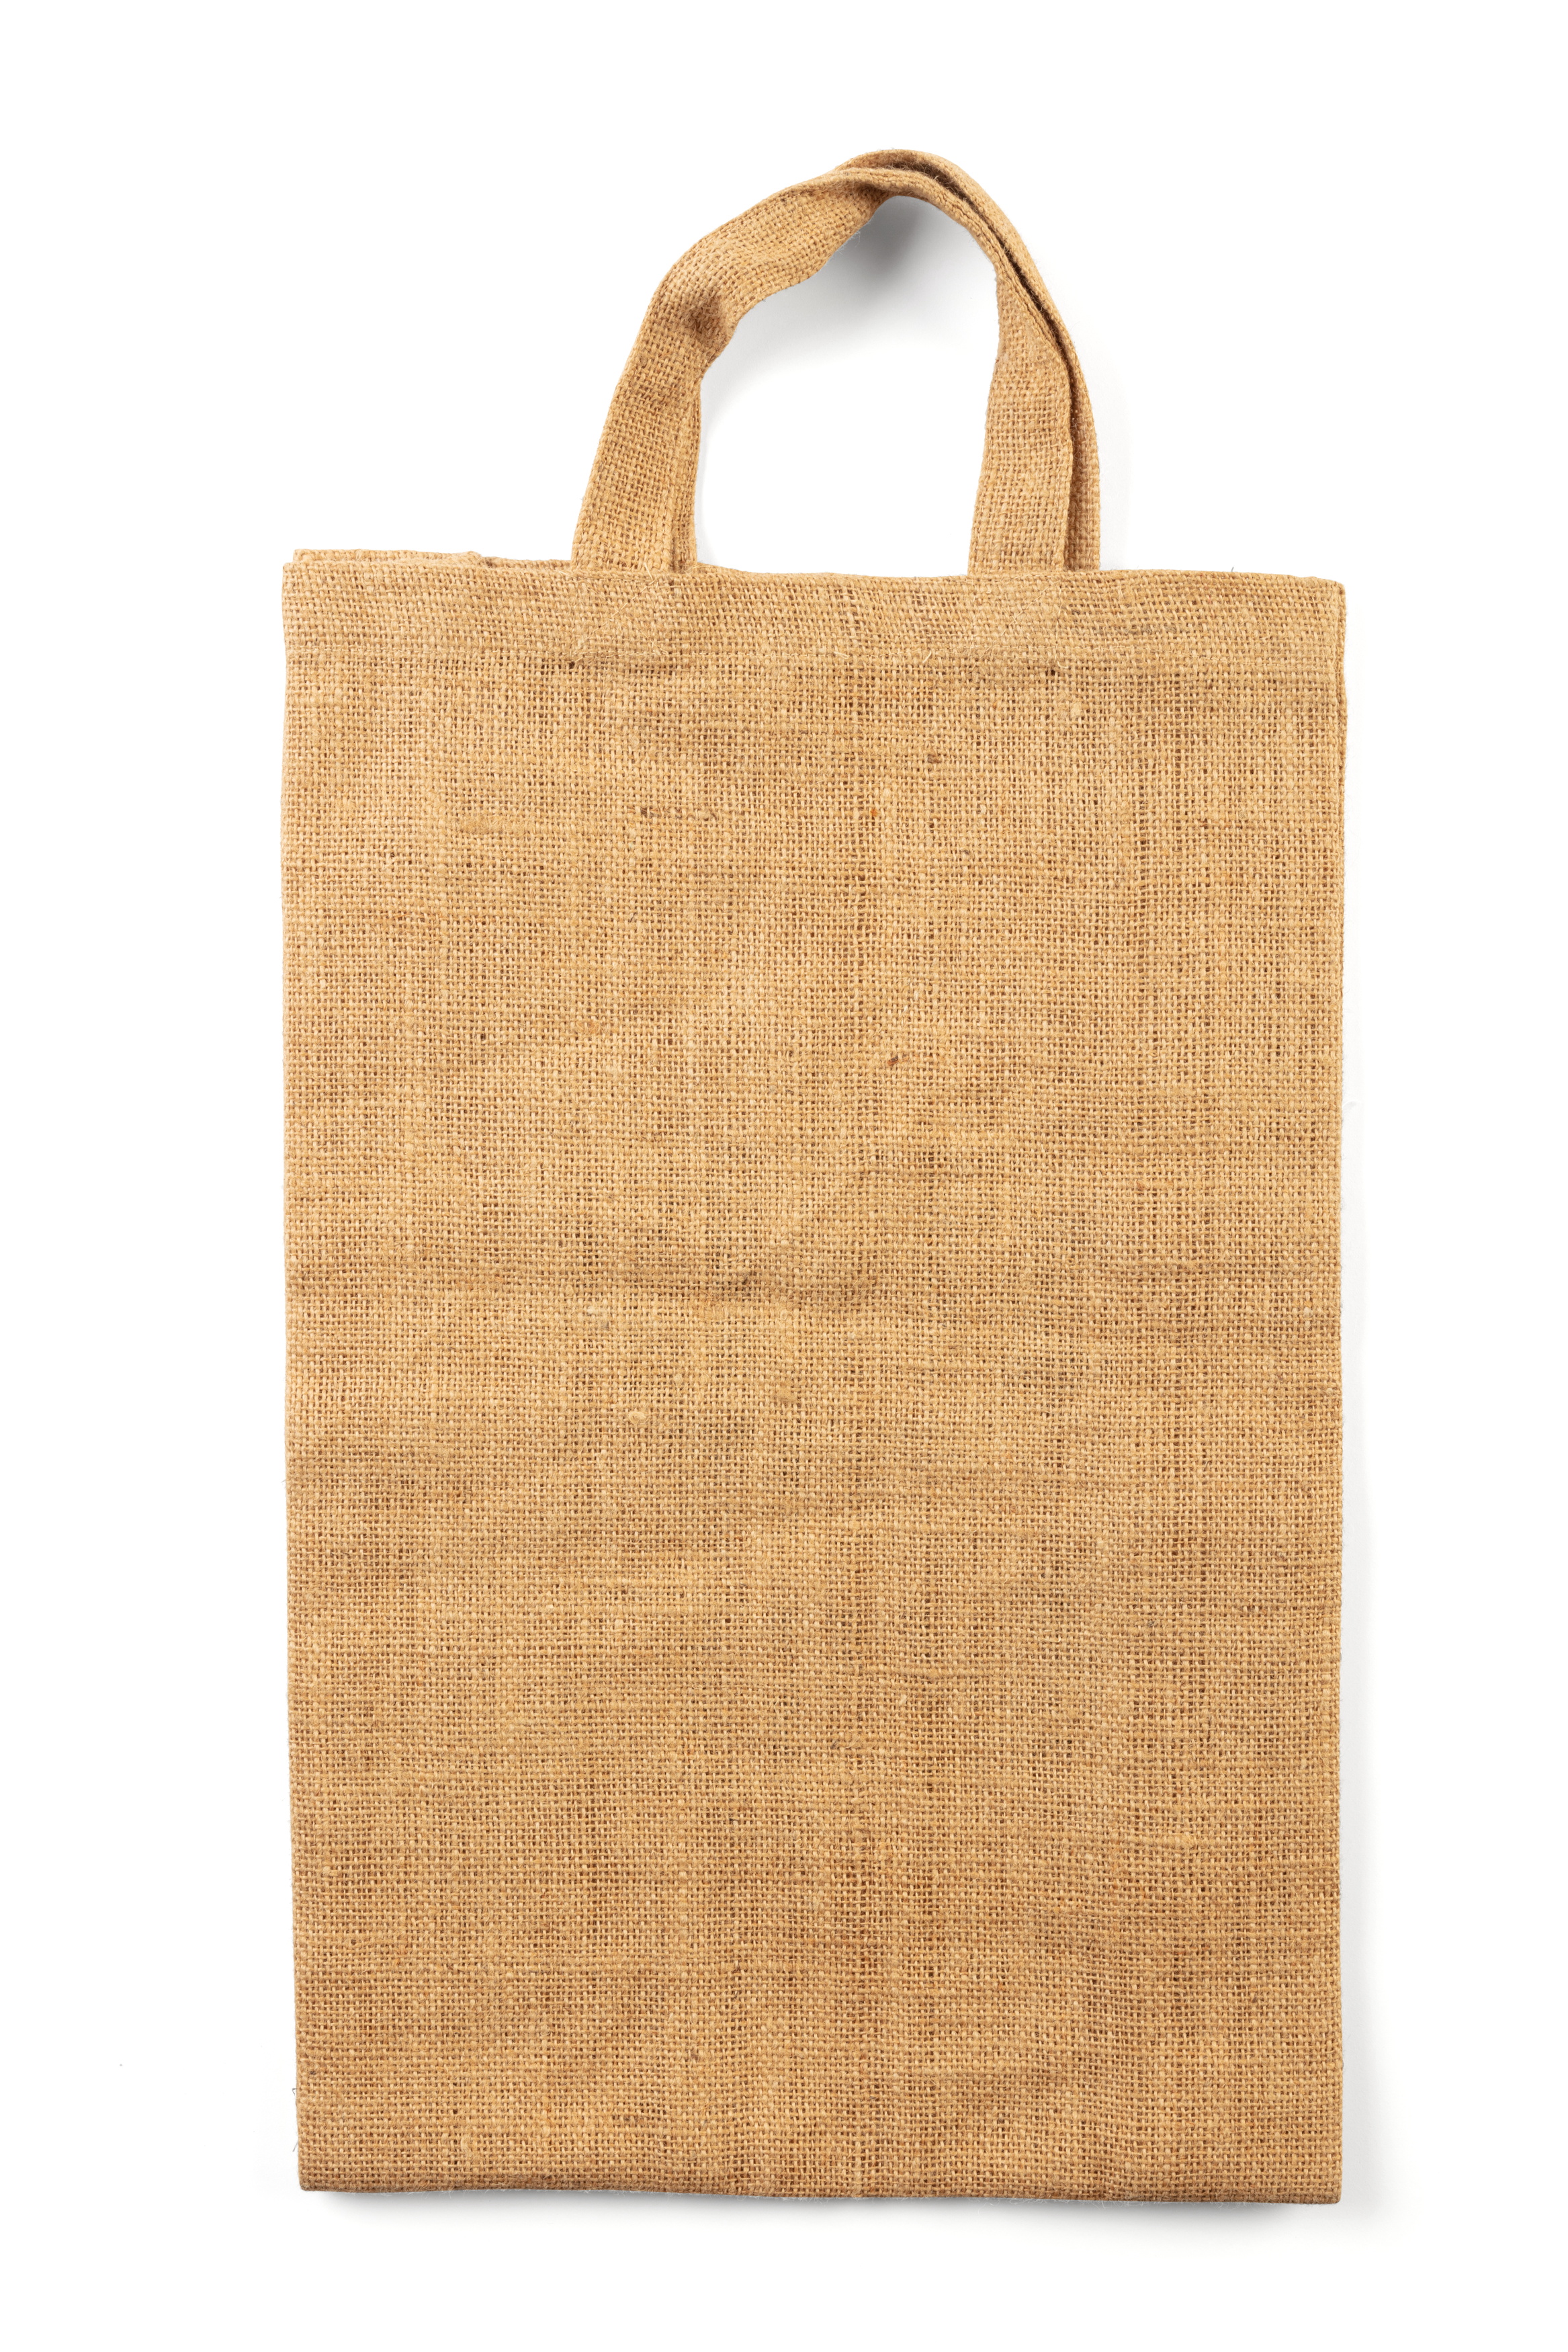 'Jute not Plastic' shopping bag by CORR - The Jute Works